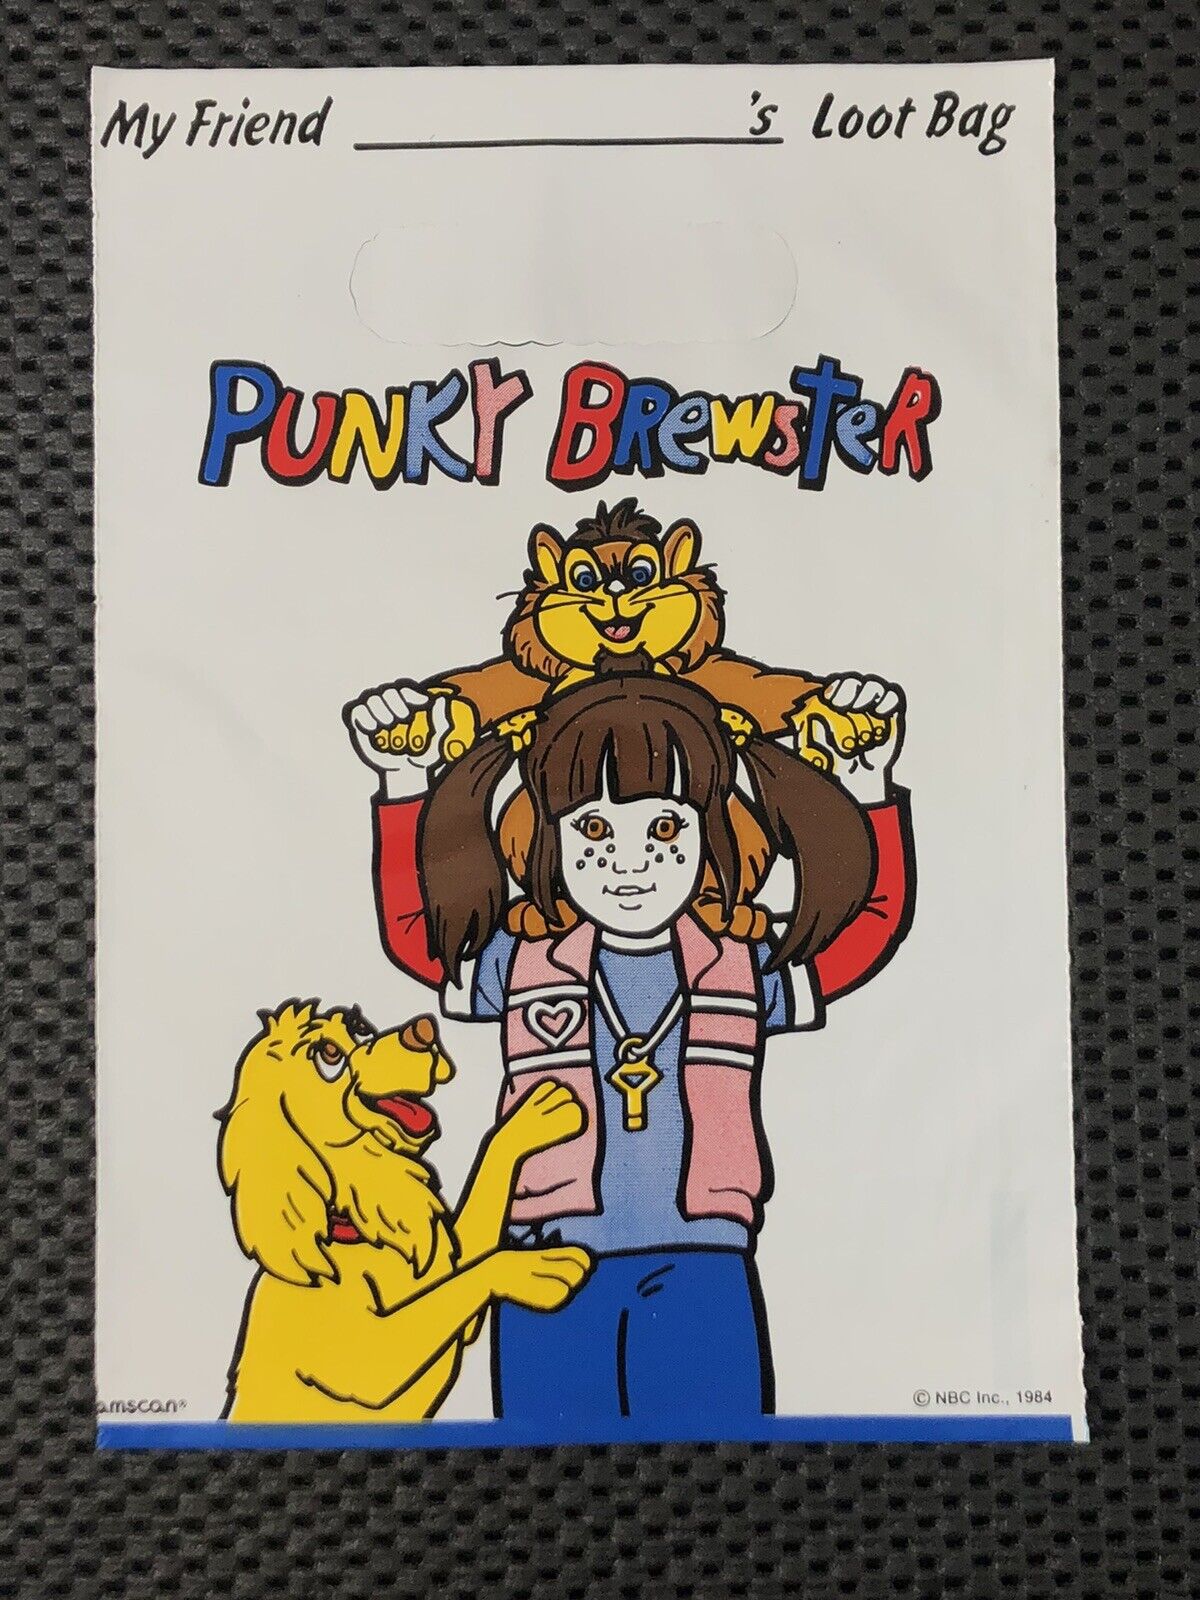 VINTAGE PUNKY BREWSTER PARTY FAVORS BAGS TREAT GOODIE GIFT LOOT BAG 1984 - 28pcs